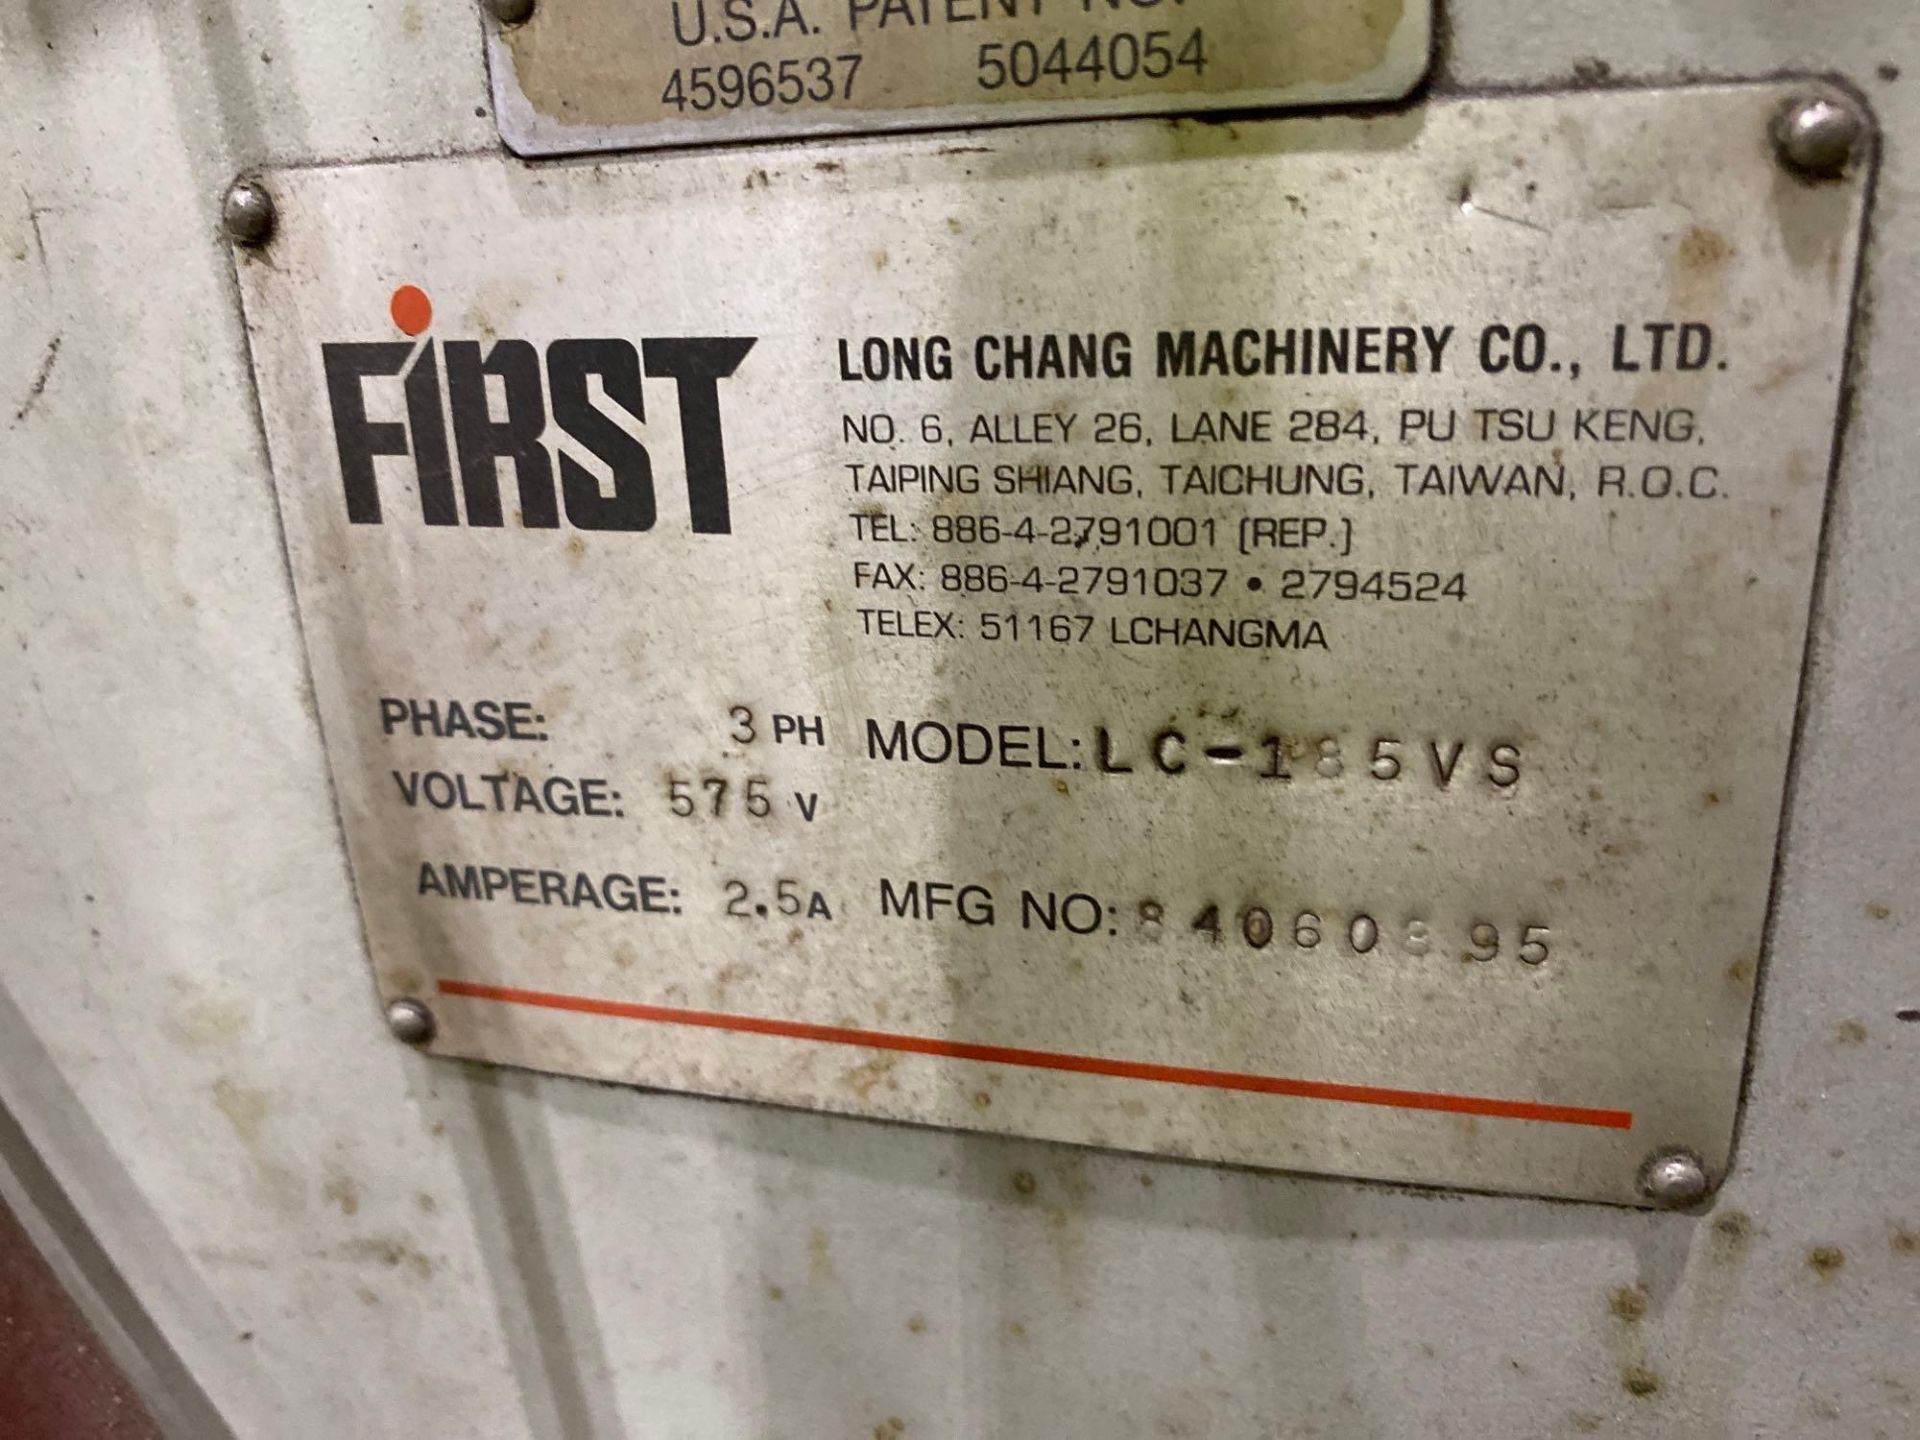 First LC-185VS Milling Machine - Image 5 of 5